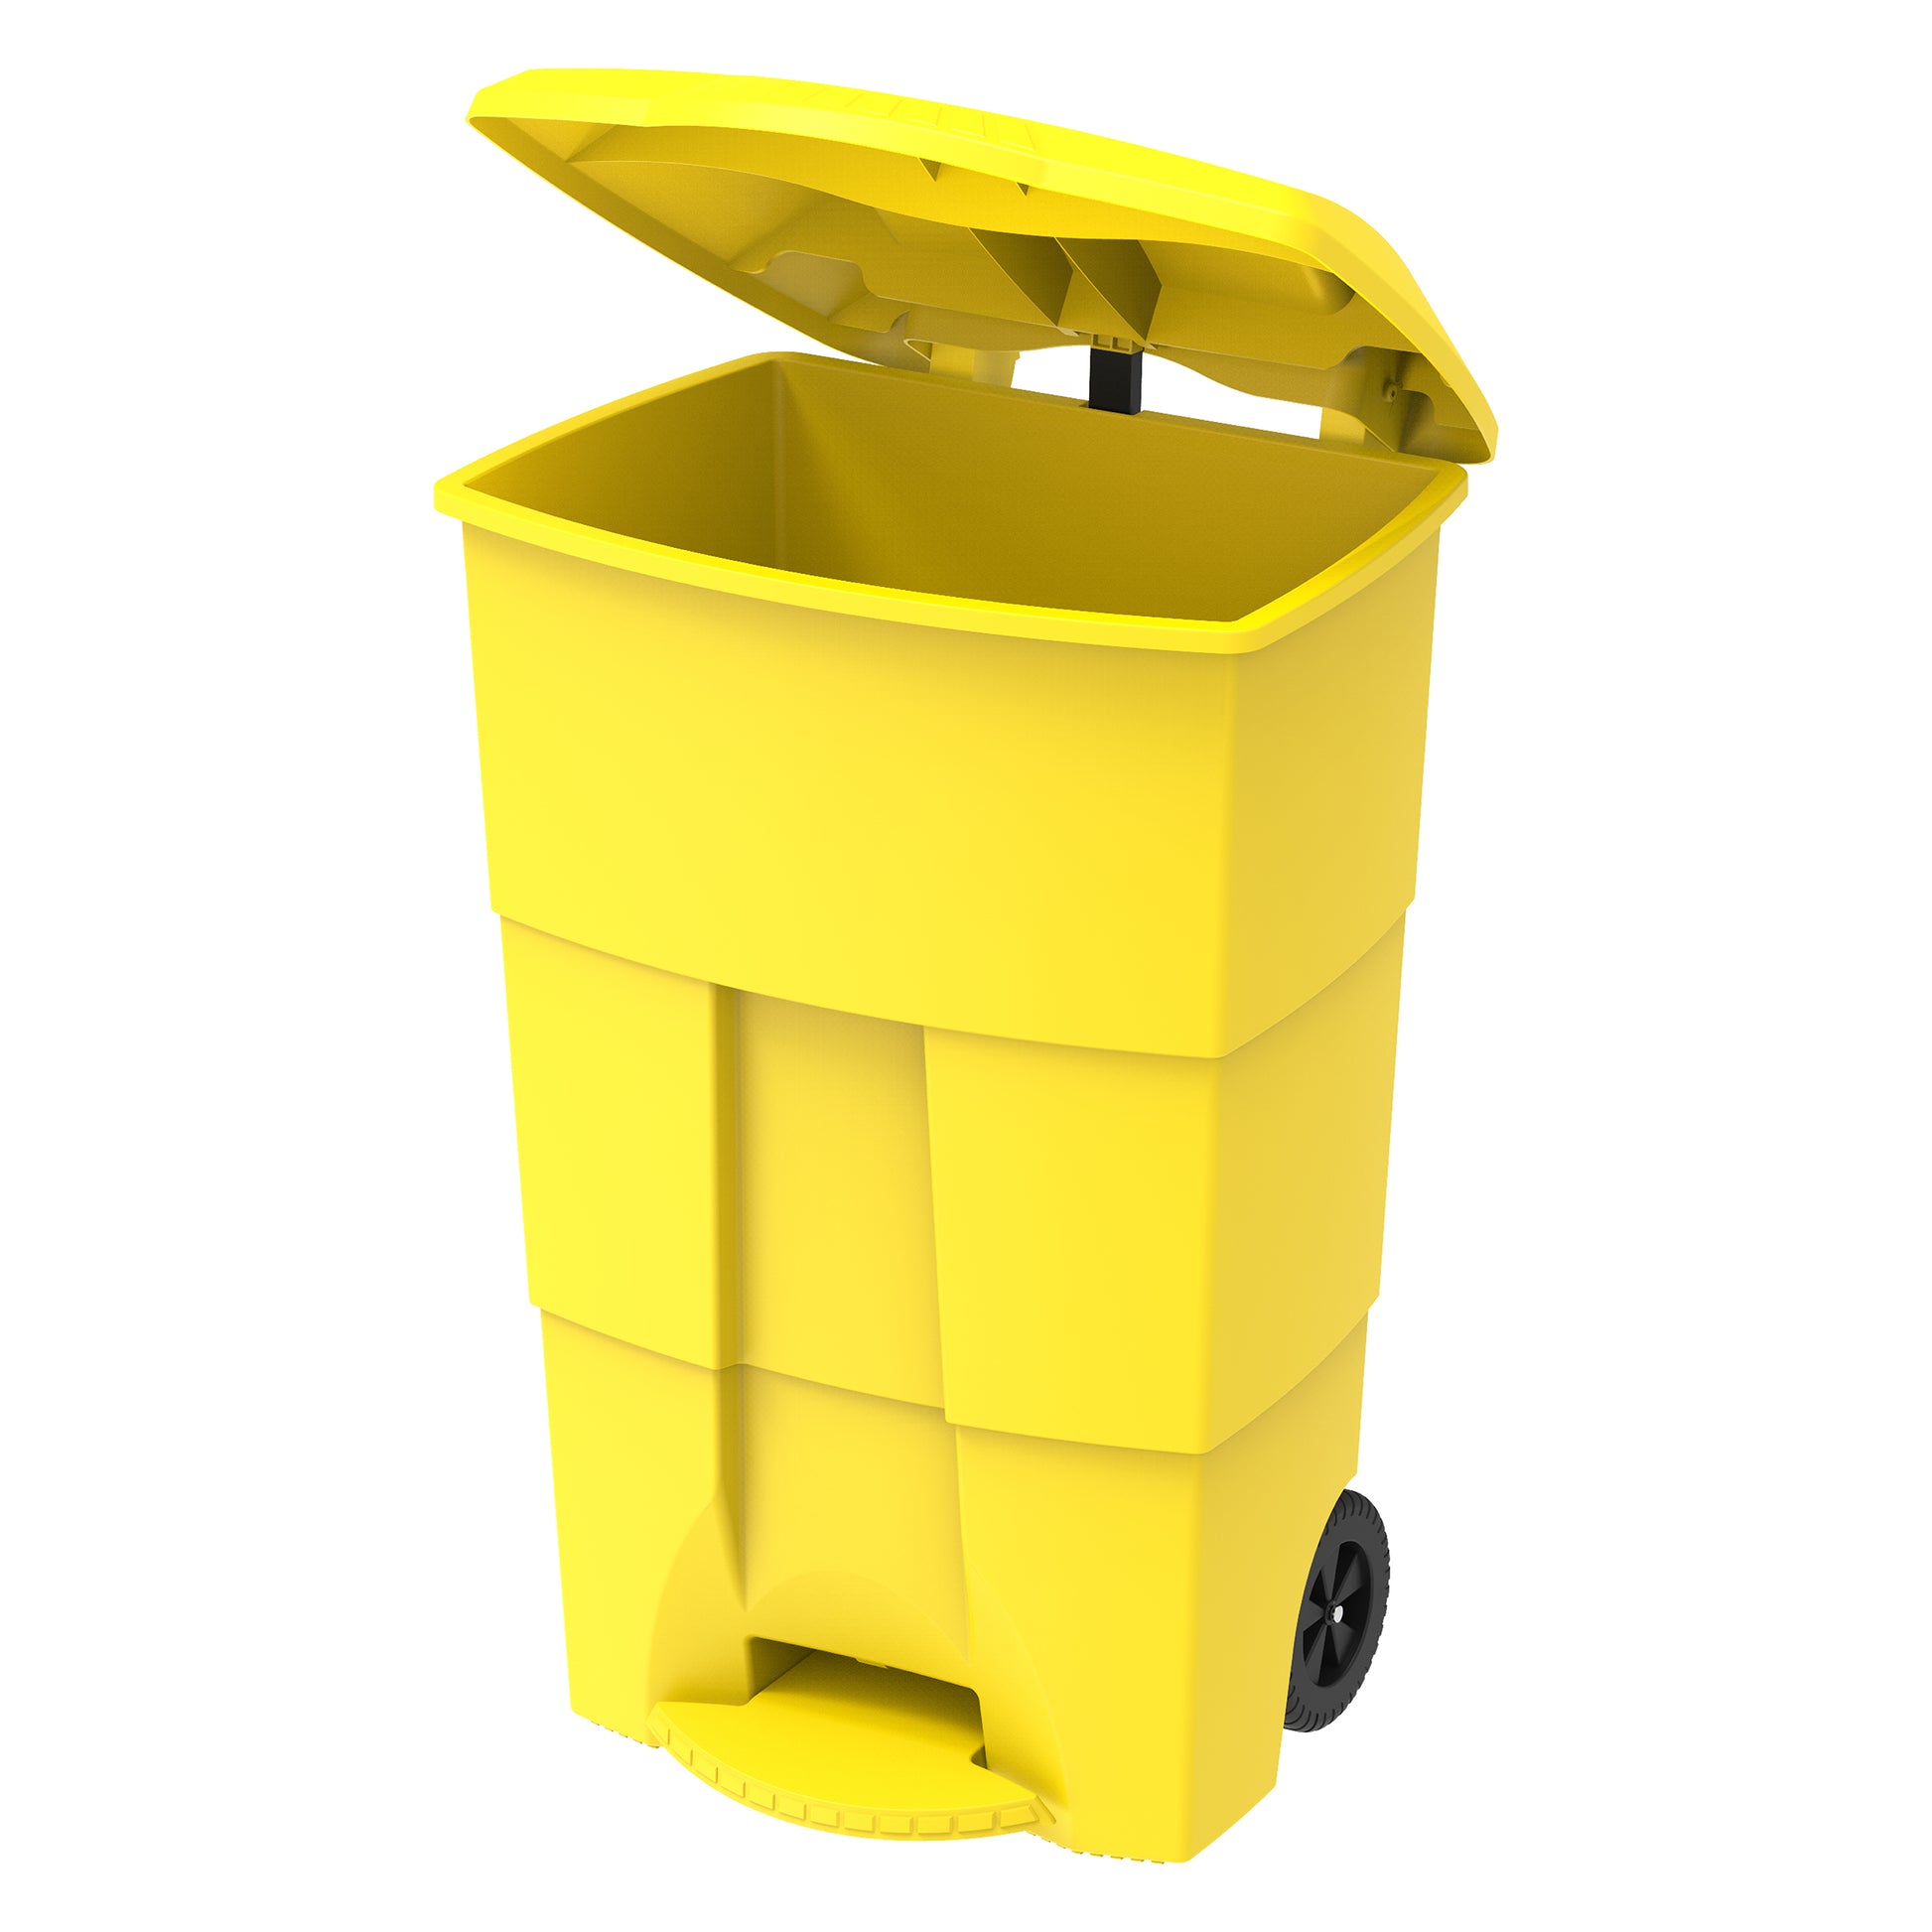 125L Step-on Waste Bin with Pedal